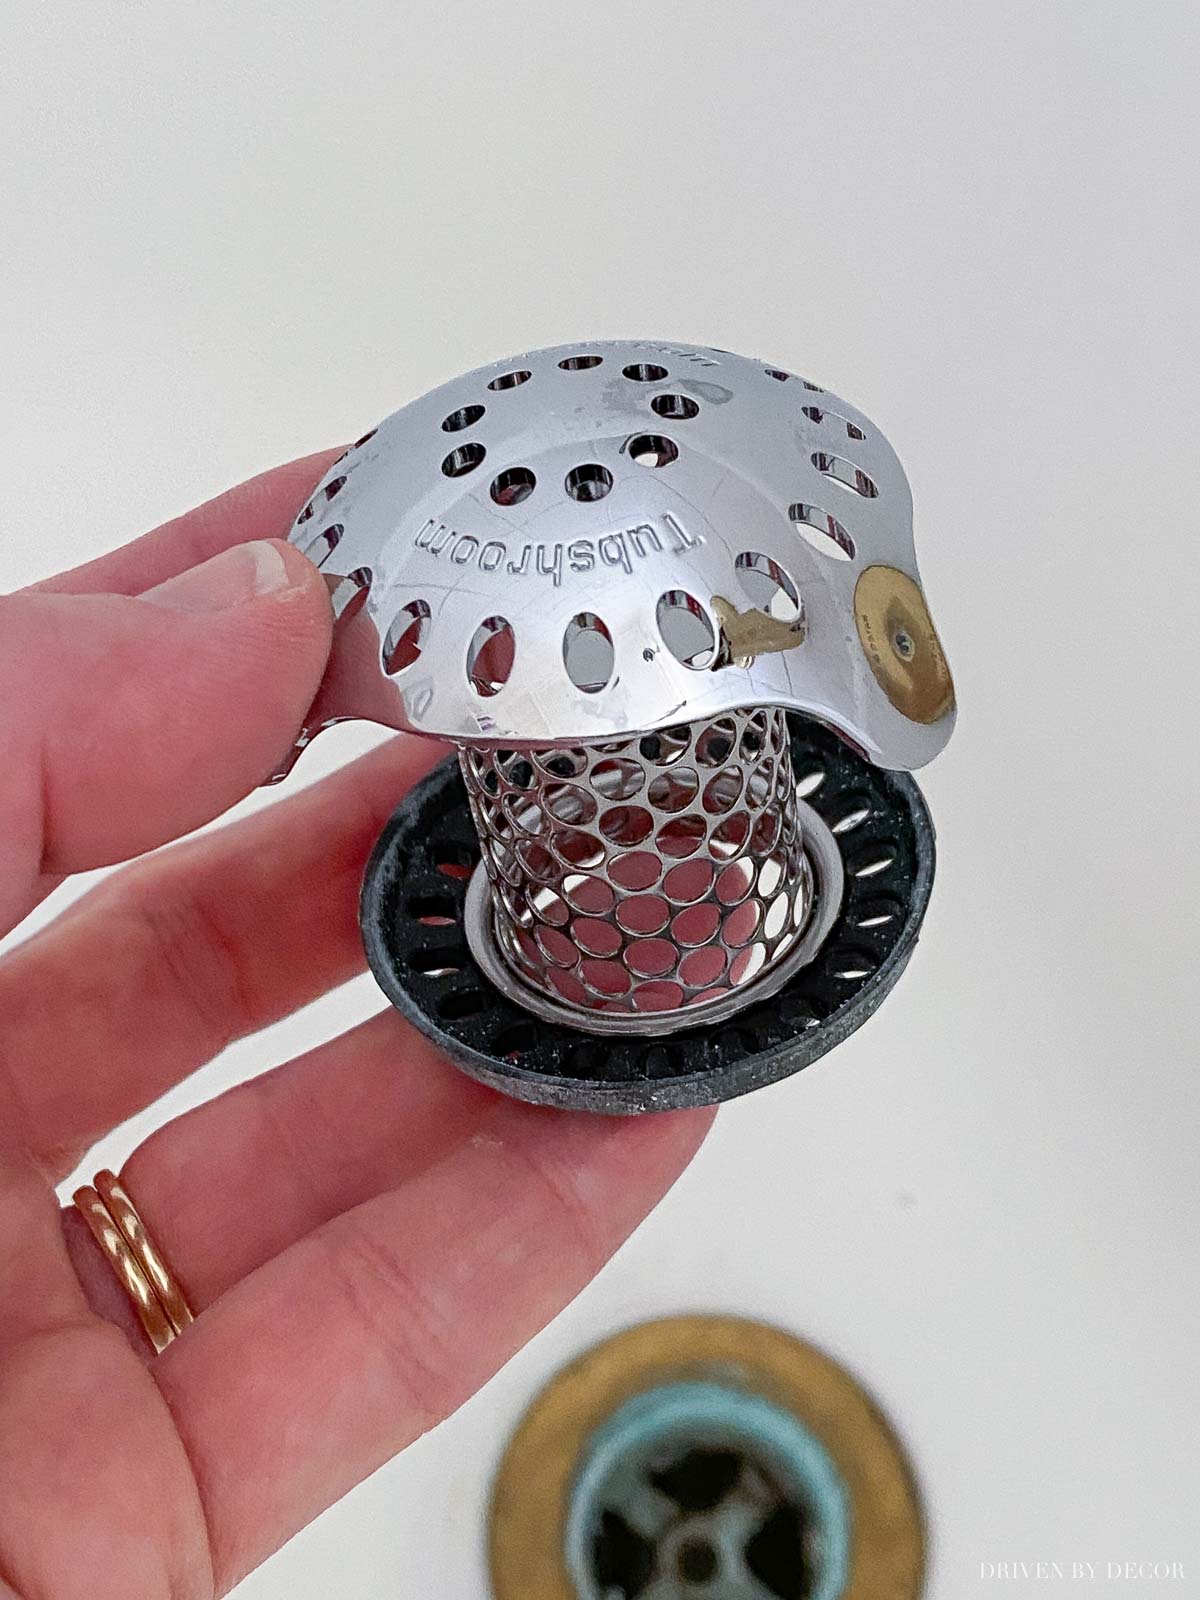 This Tub Shroom is awesome for keeping hair from clogging your shower drain! One of my favorite Amazon gadgets!